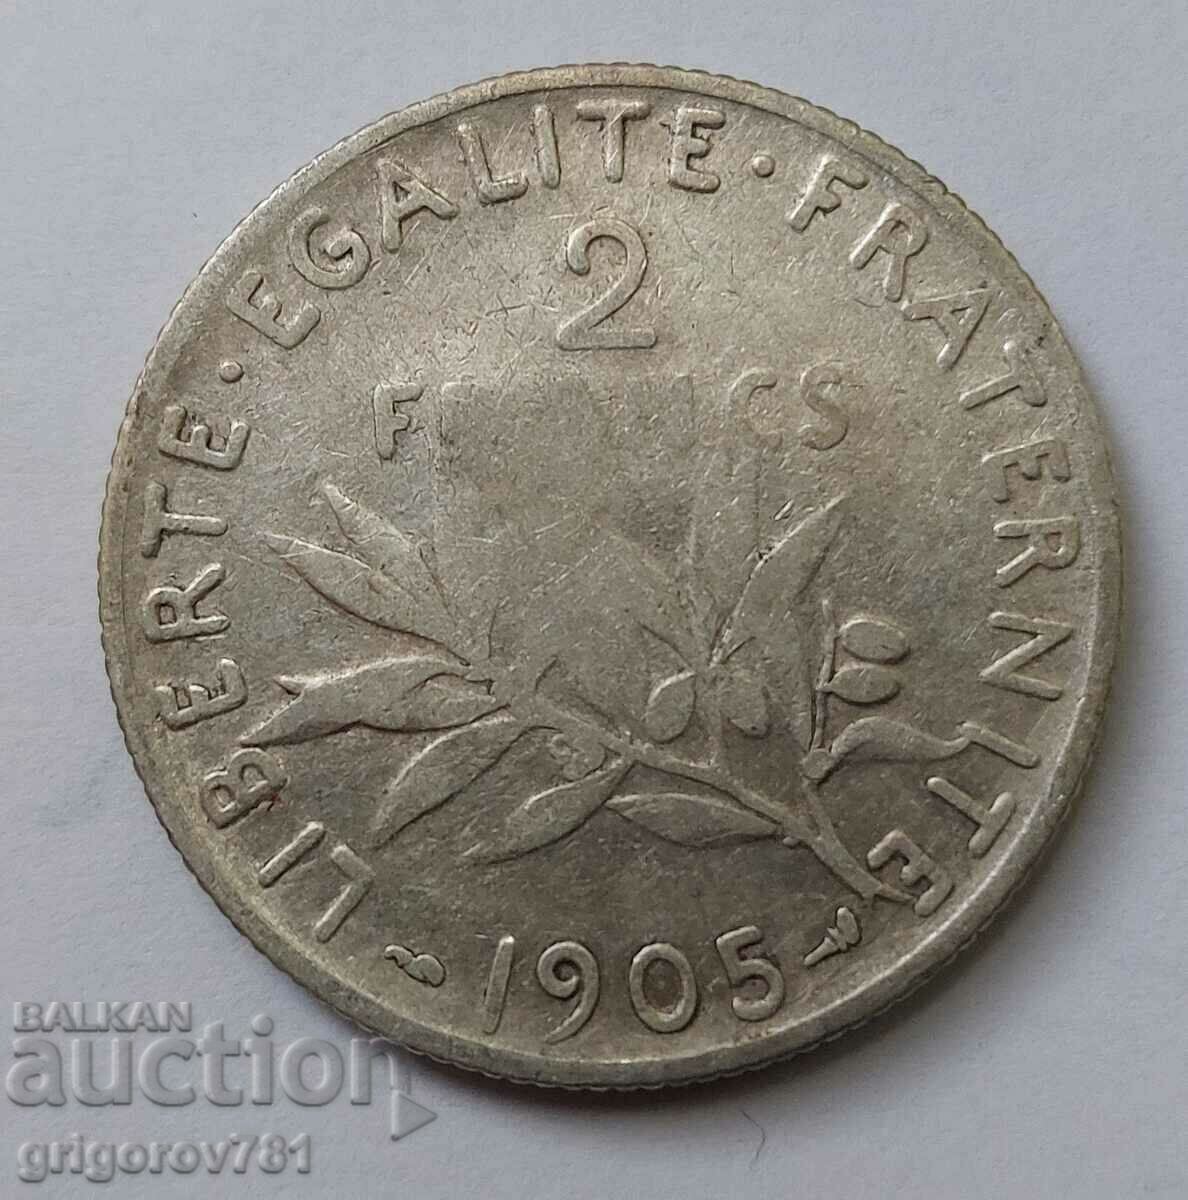 2 Francs Silver France 1905 - Silver Coin #150